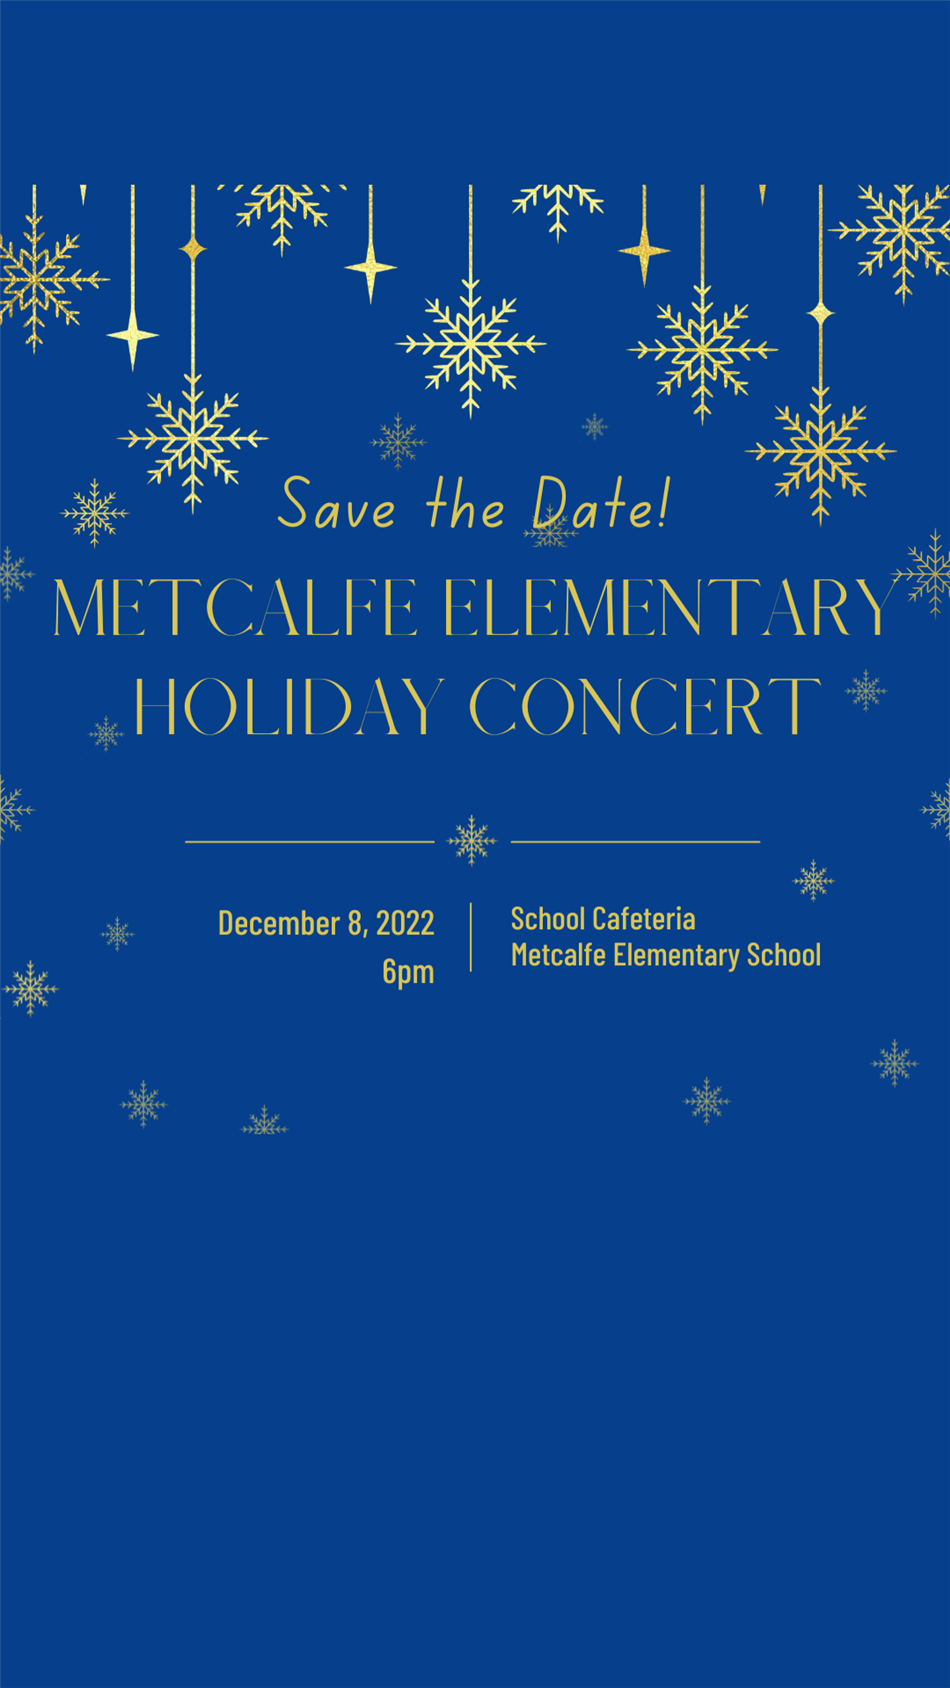  Metcalfe Elementary Holiday Concert